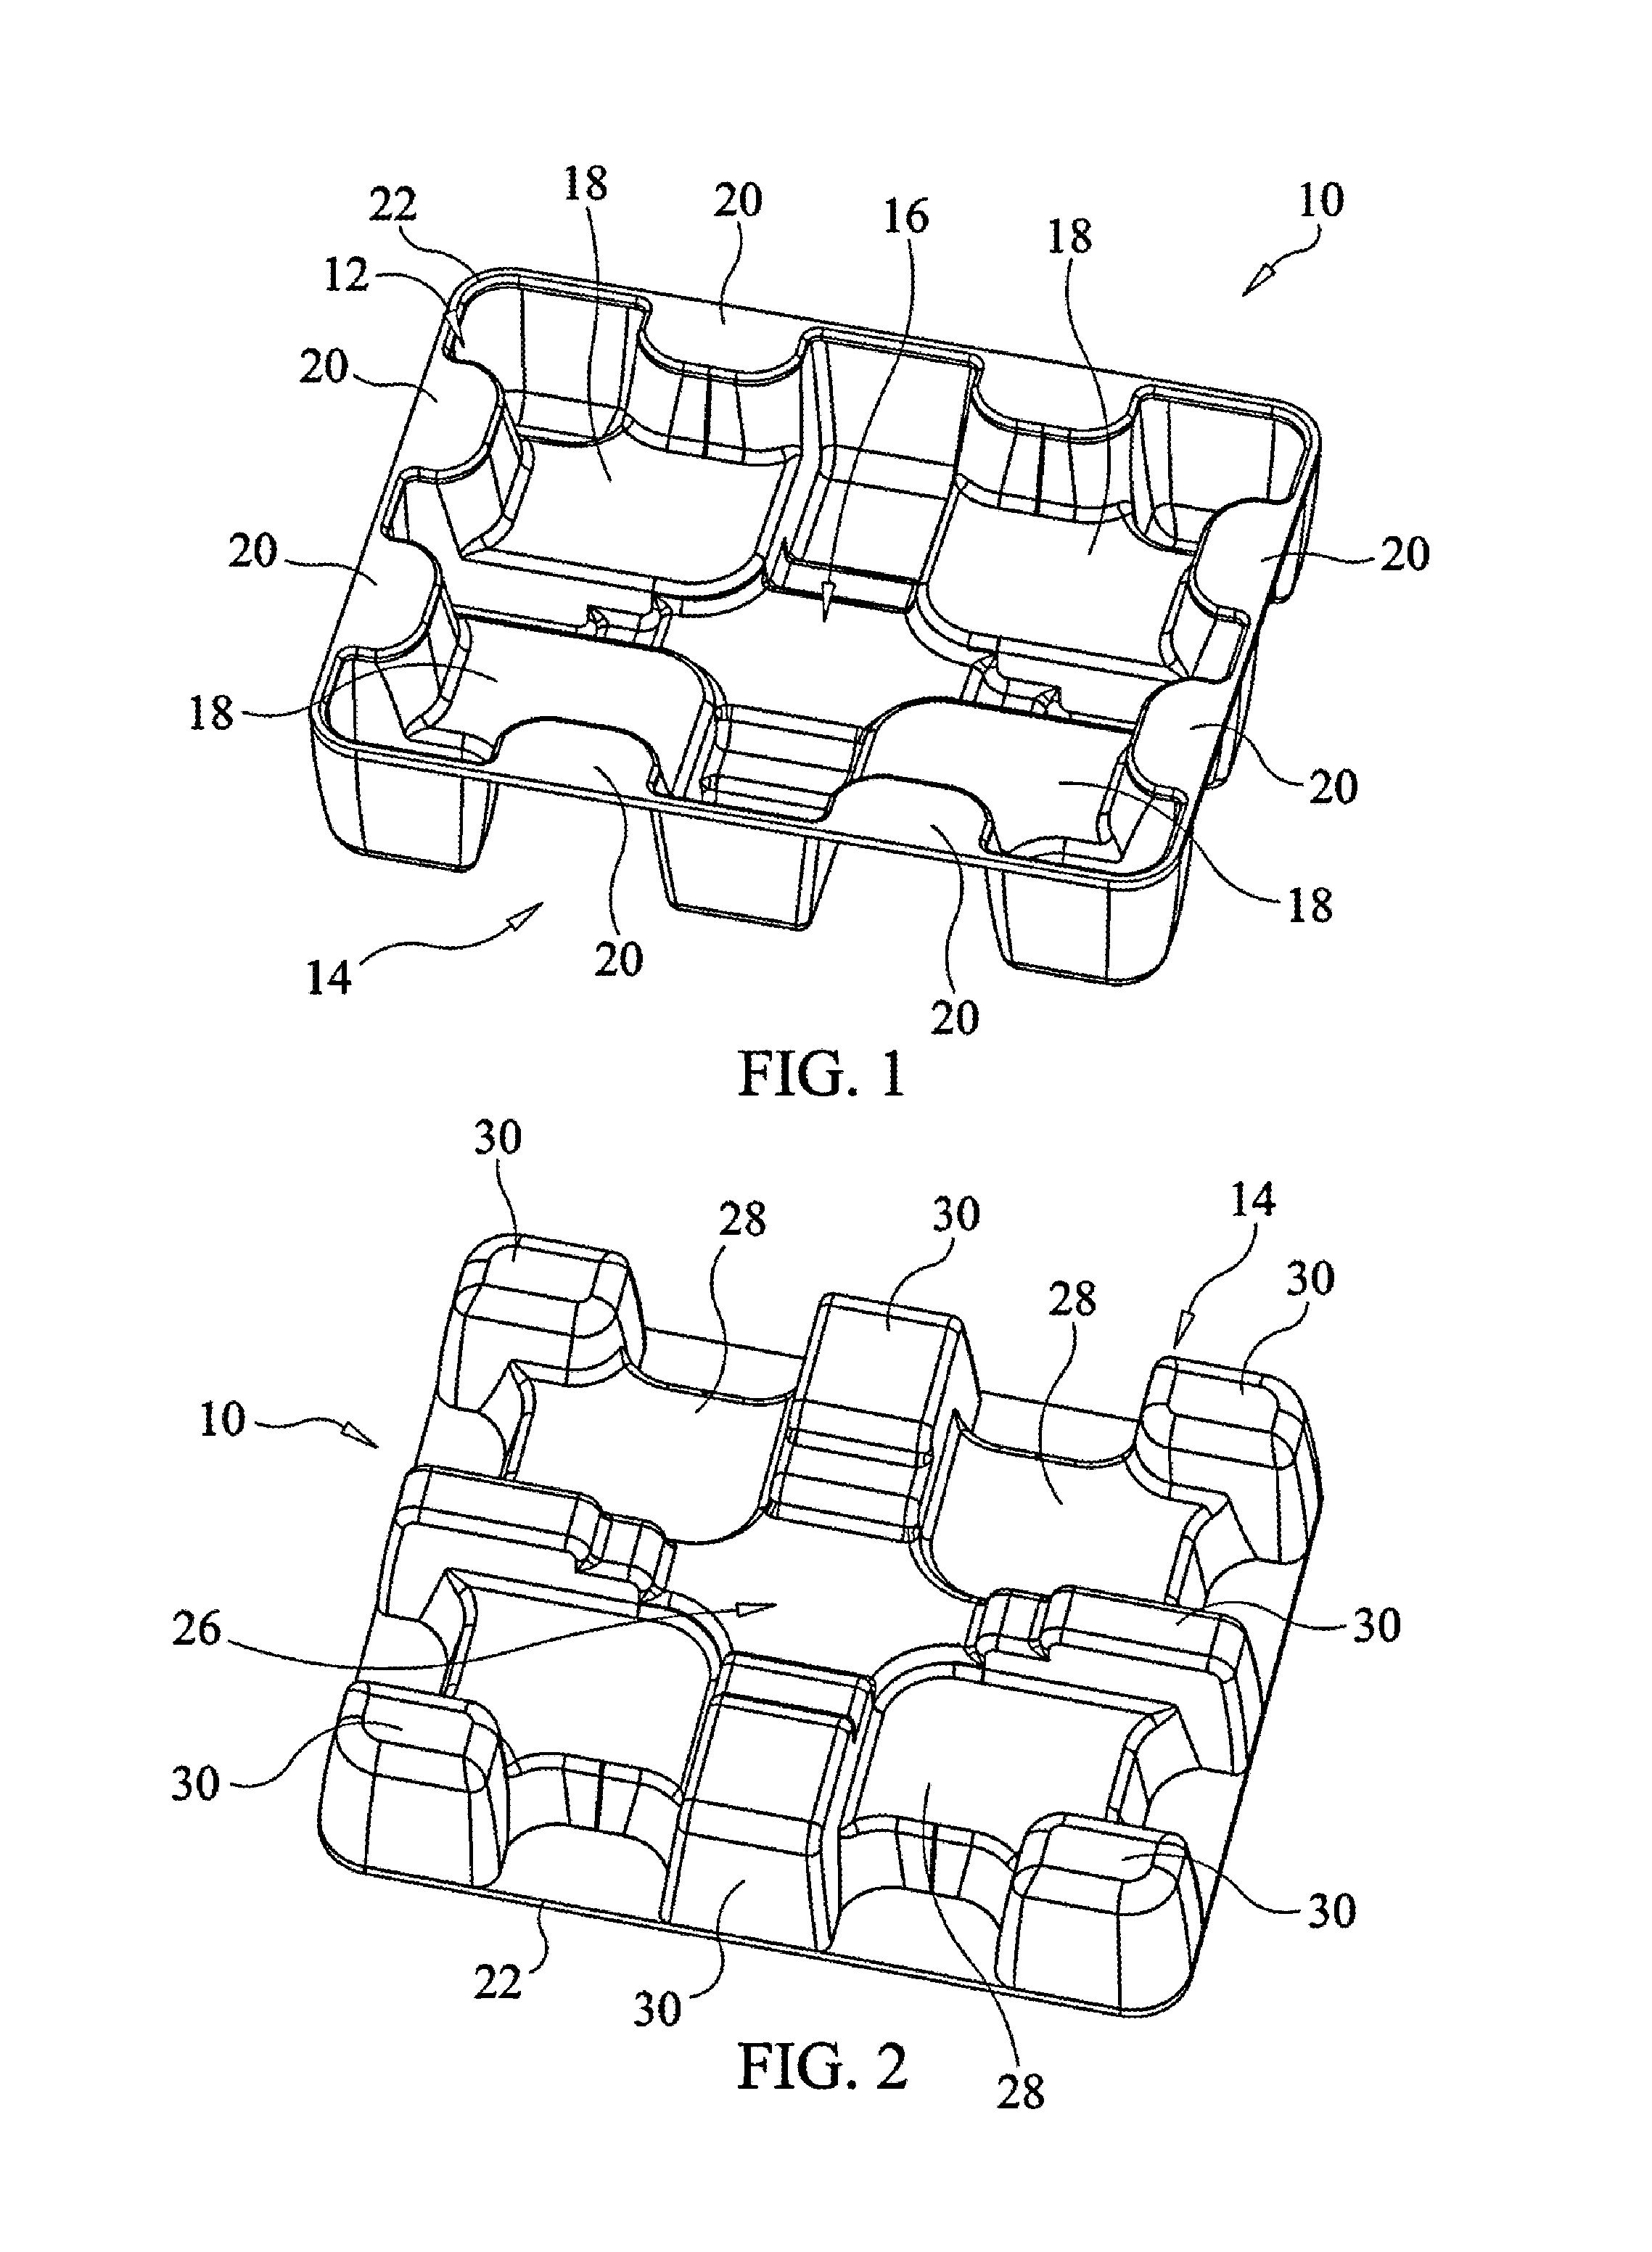 Apparatus, systems and methods for packaging electronic products